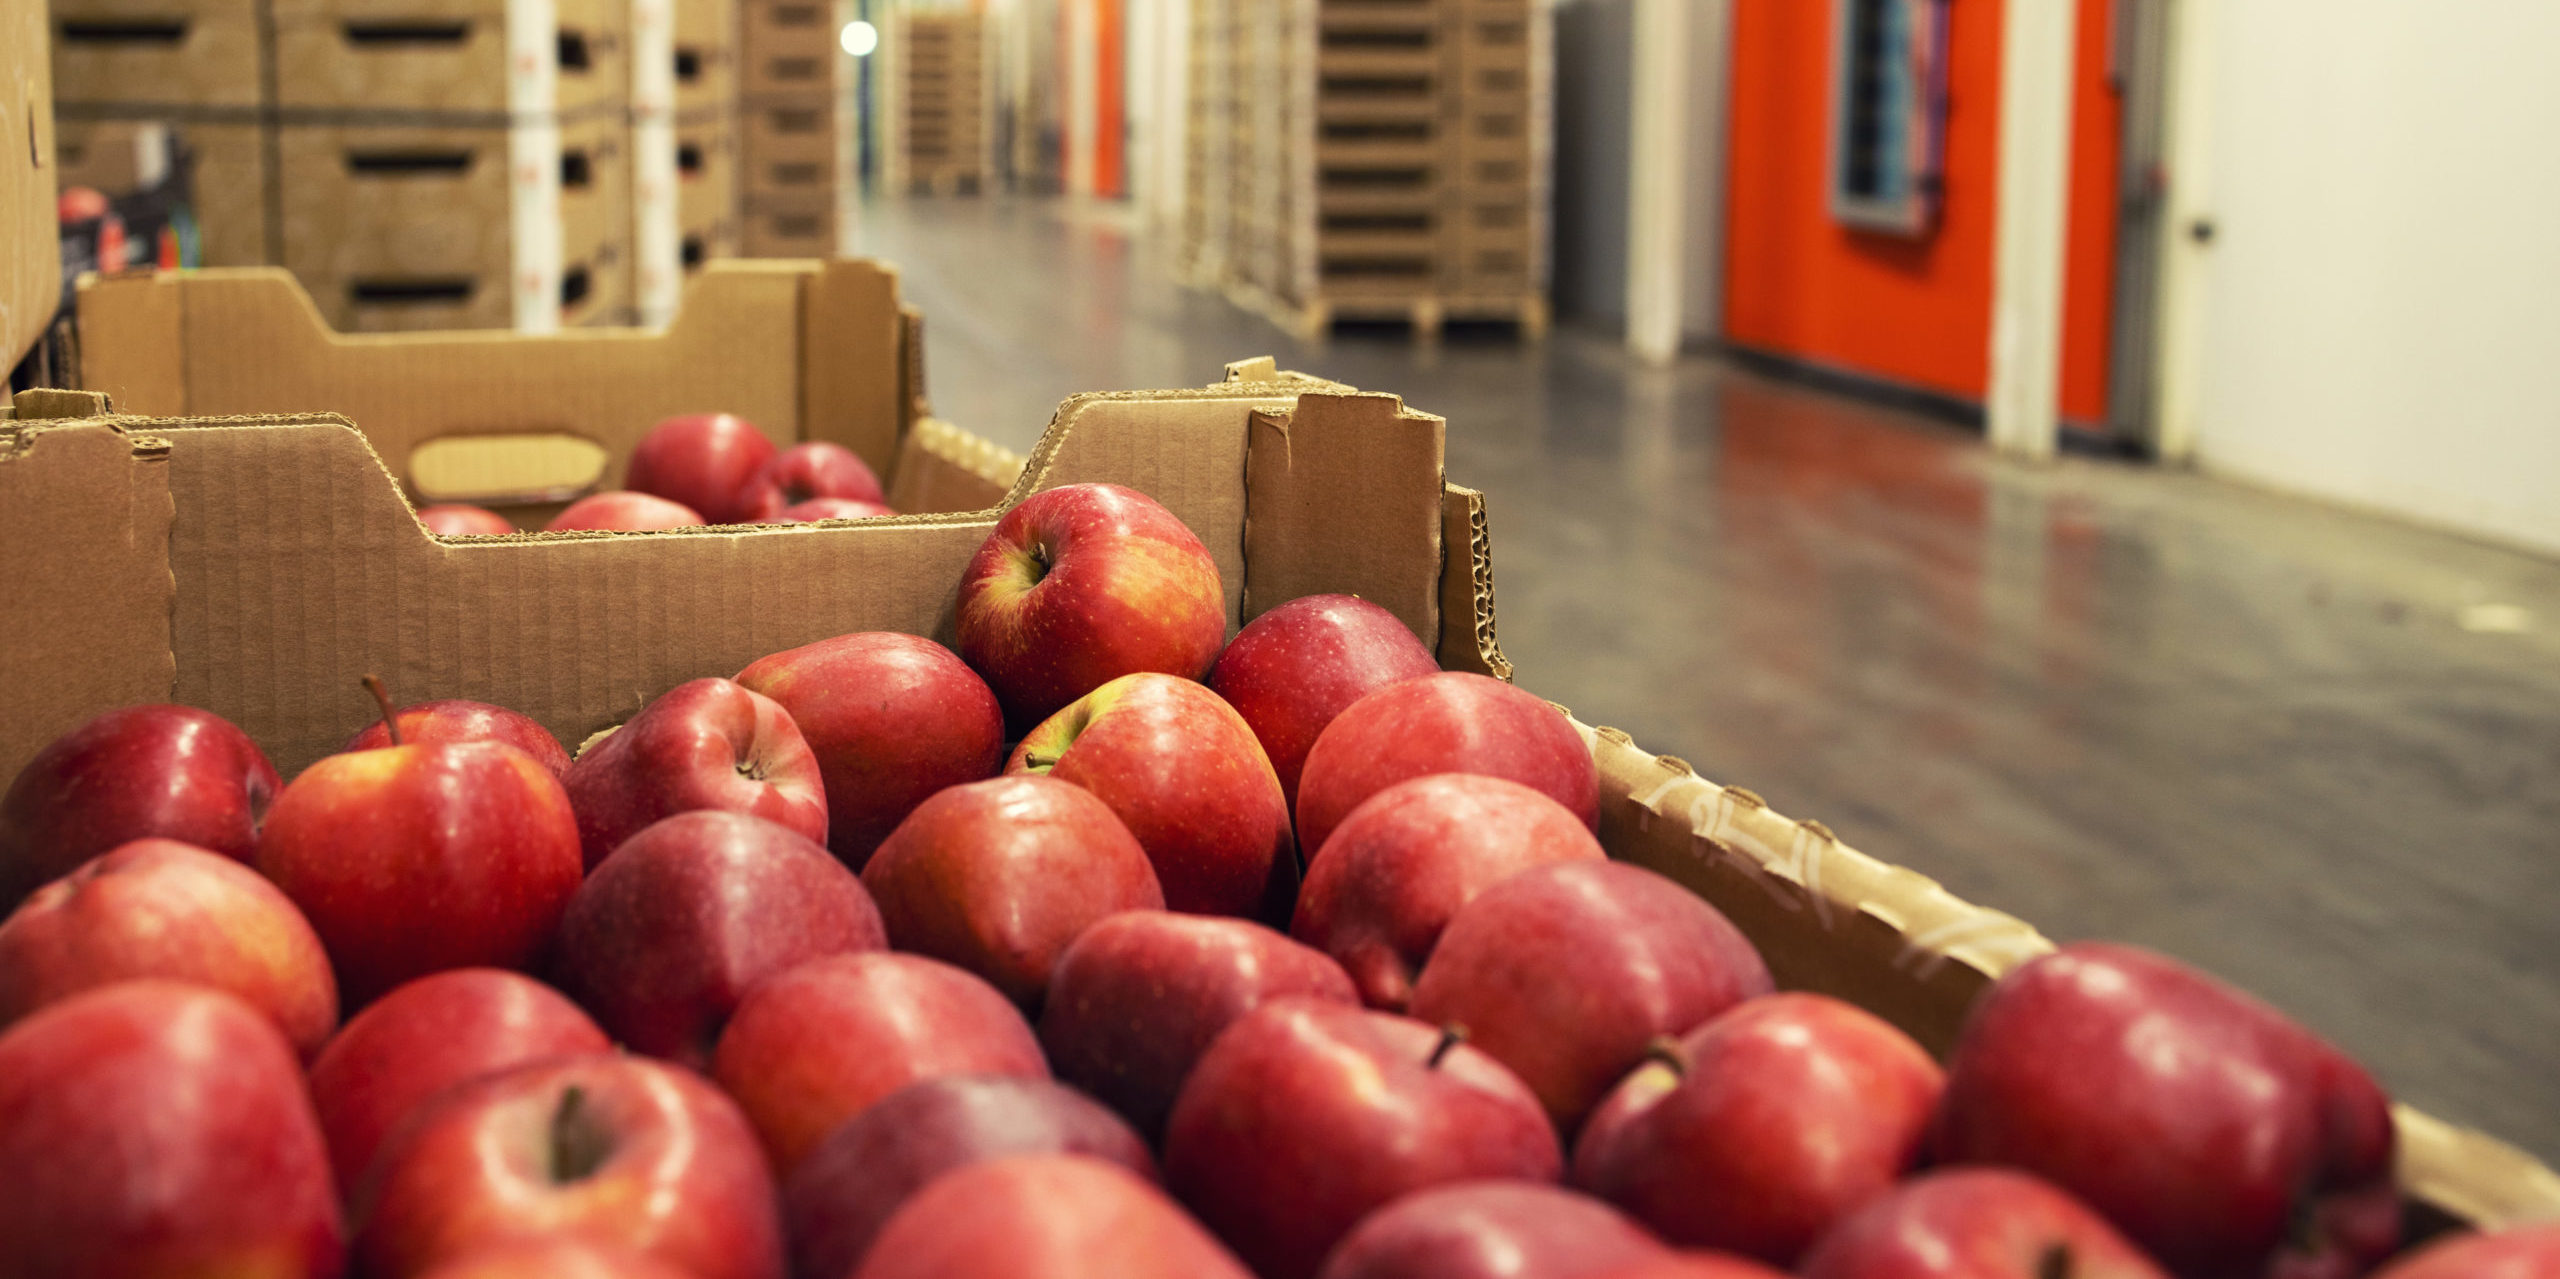 Food is being wasted at every level of the supply chain